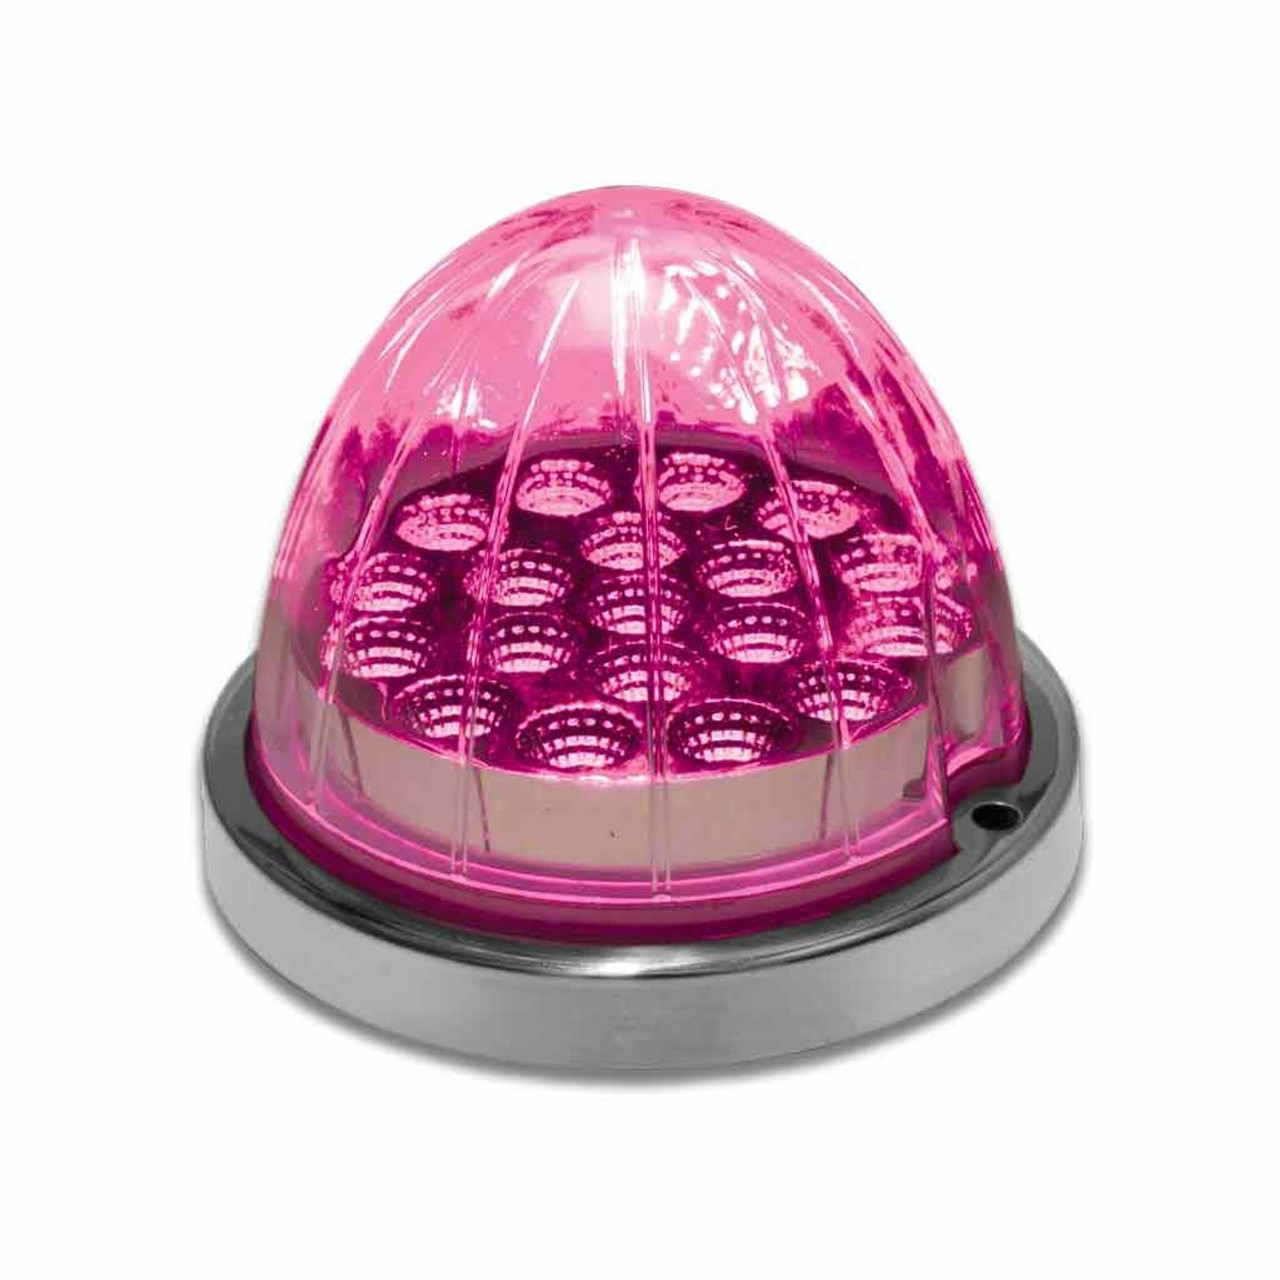 DUAL REVOLUTION AMBER CLEARANCE & MARKER TO PINK AUXILIARY WATERMELON LED LIGHT (19 DIODES)